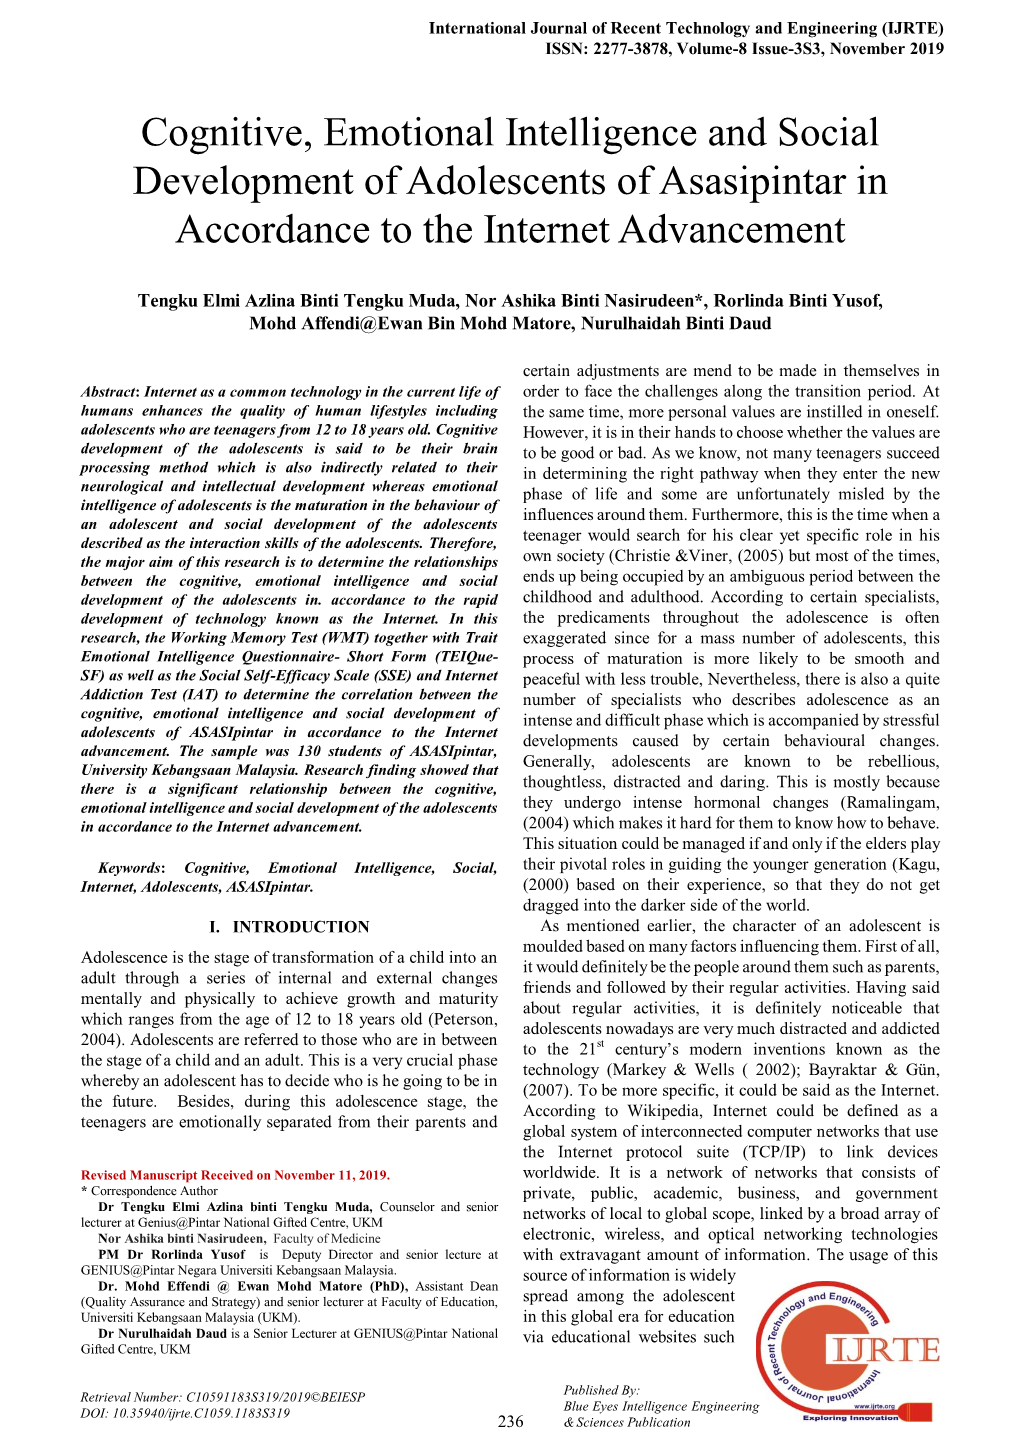 Cognitive, Emotional Intelligence and Social Development of Adolescents of Asasipintar in Accordance to the Internet Advancement